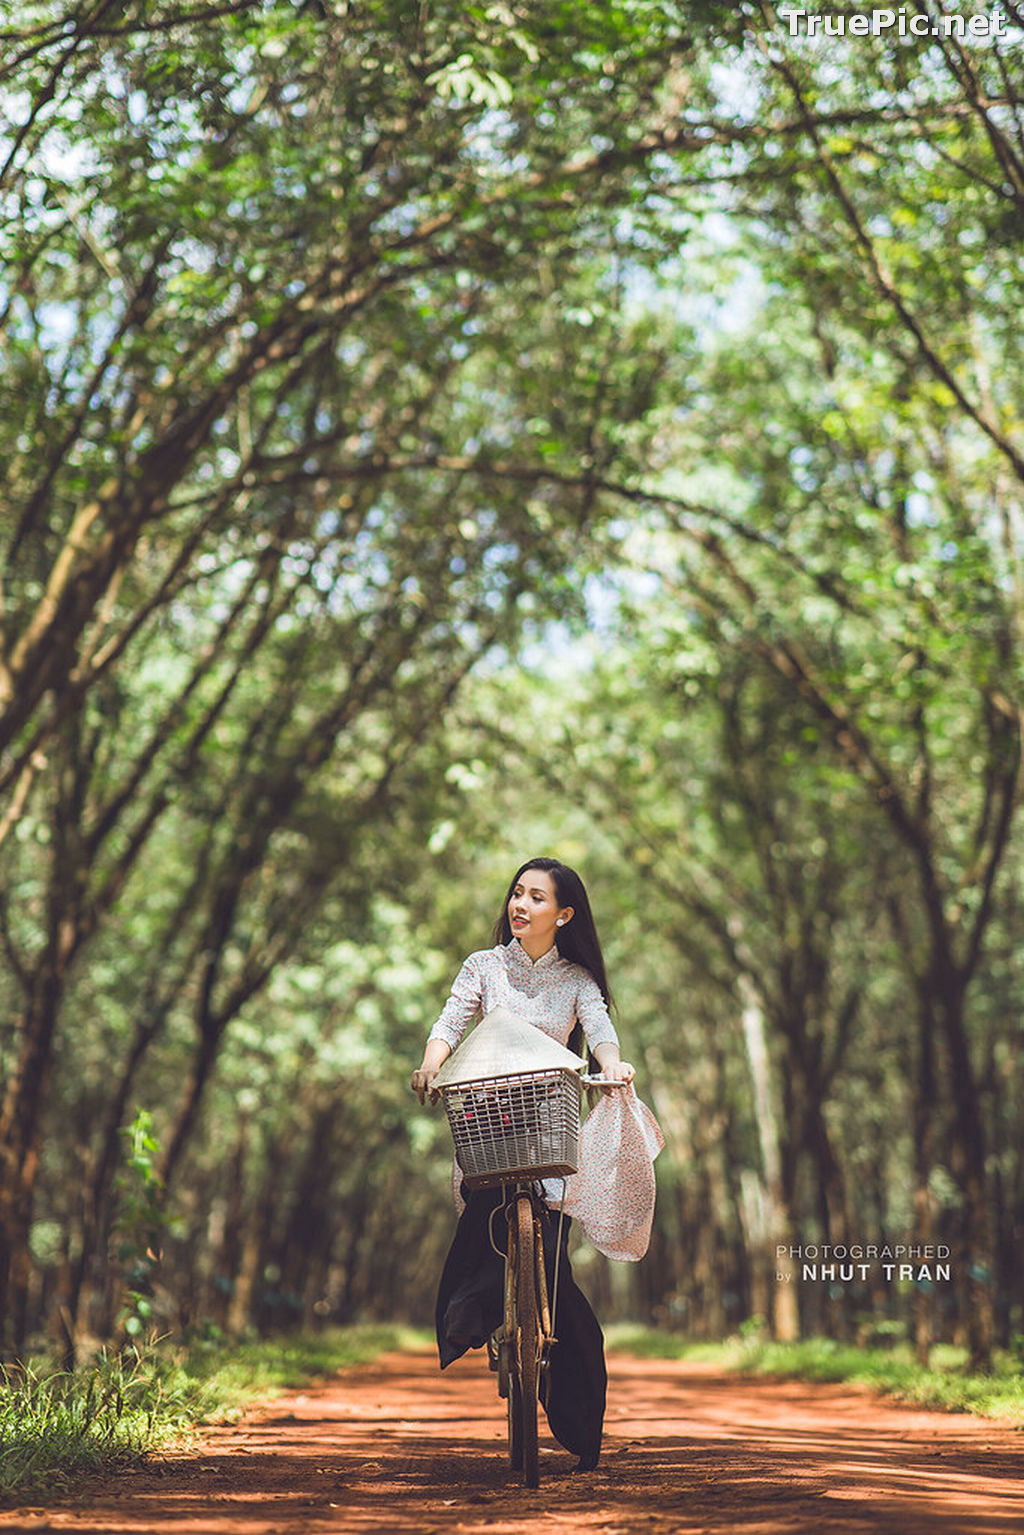 Image The Beauty of Vietnamese Girls with Traditional Dress (Ao Dai) #5 - TruePic.net - Picture-57